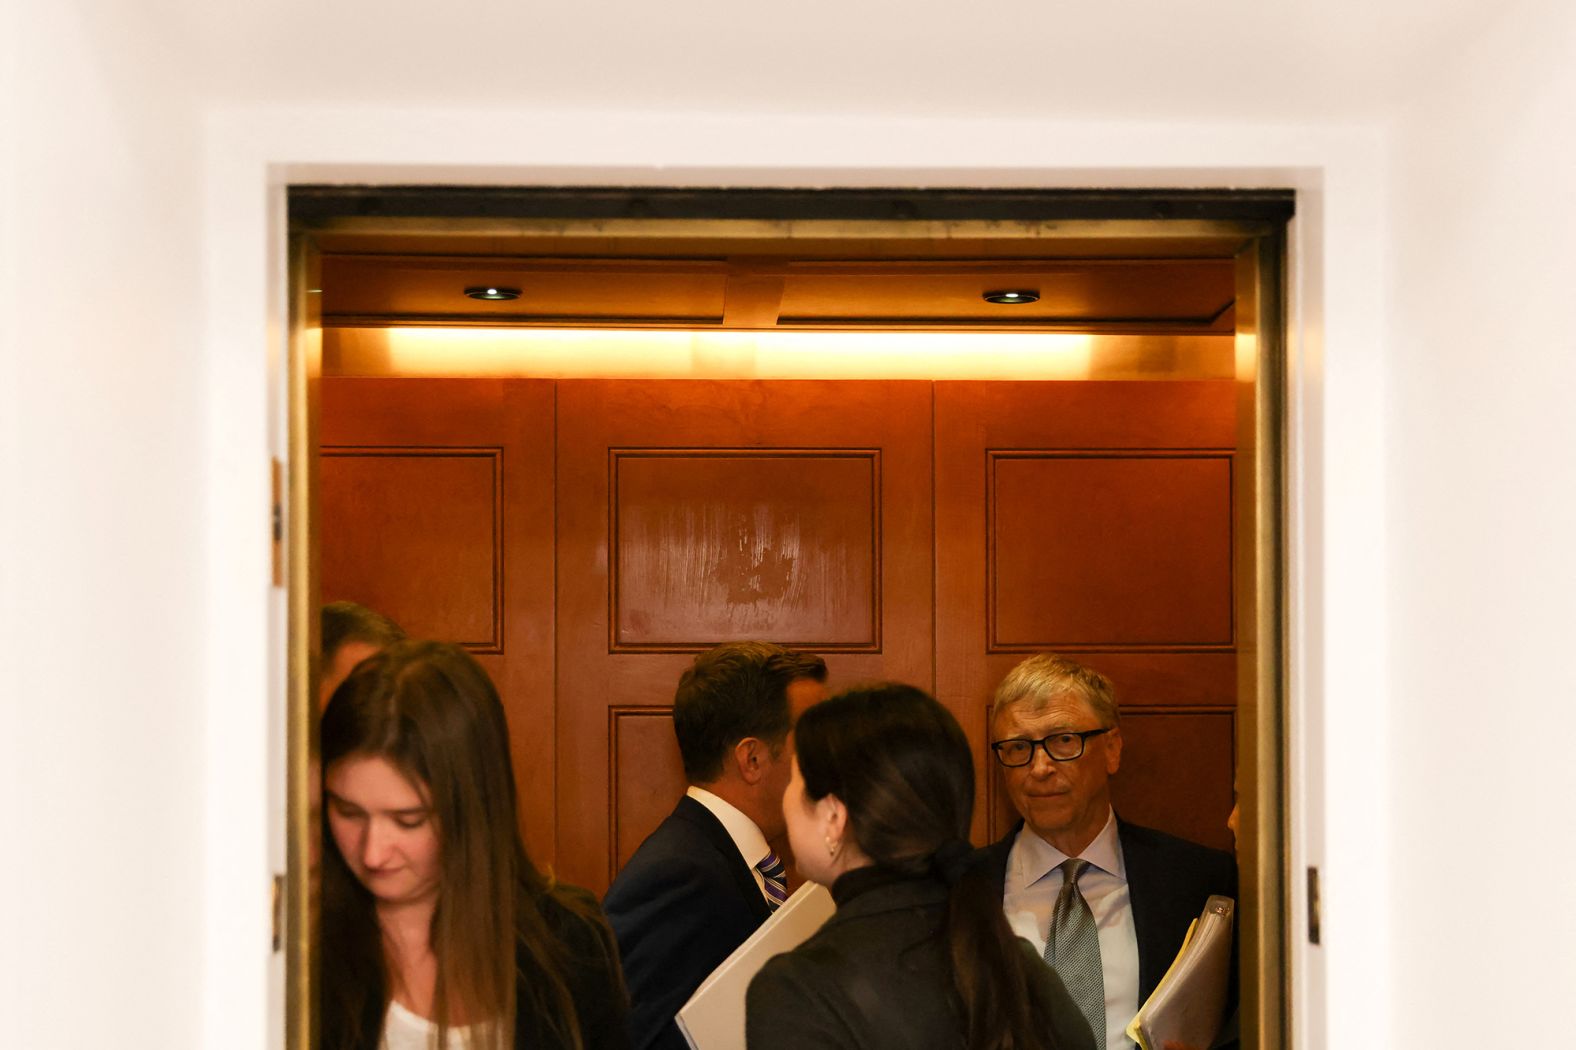 Gates rides an elevator on Capitol Hill in Washington, DC, in March 2023. In September of that year, he and other tech leaders attended a <a href="https://www.cnn.com/2023/09/13/tech/schumer-tech-companies-ai-regulations/index.html" target="_blank">three-hour Senate hearing on artificial intelligence</a>.